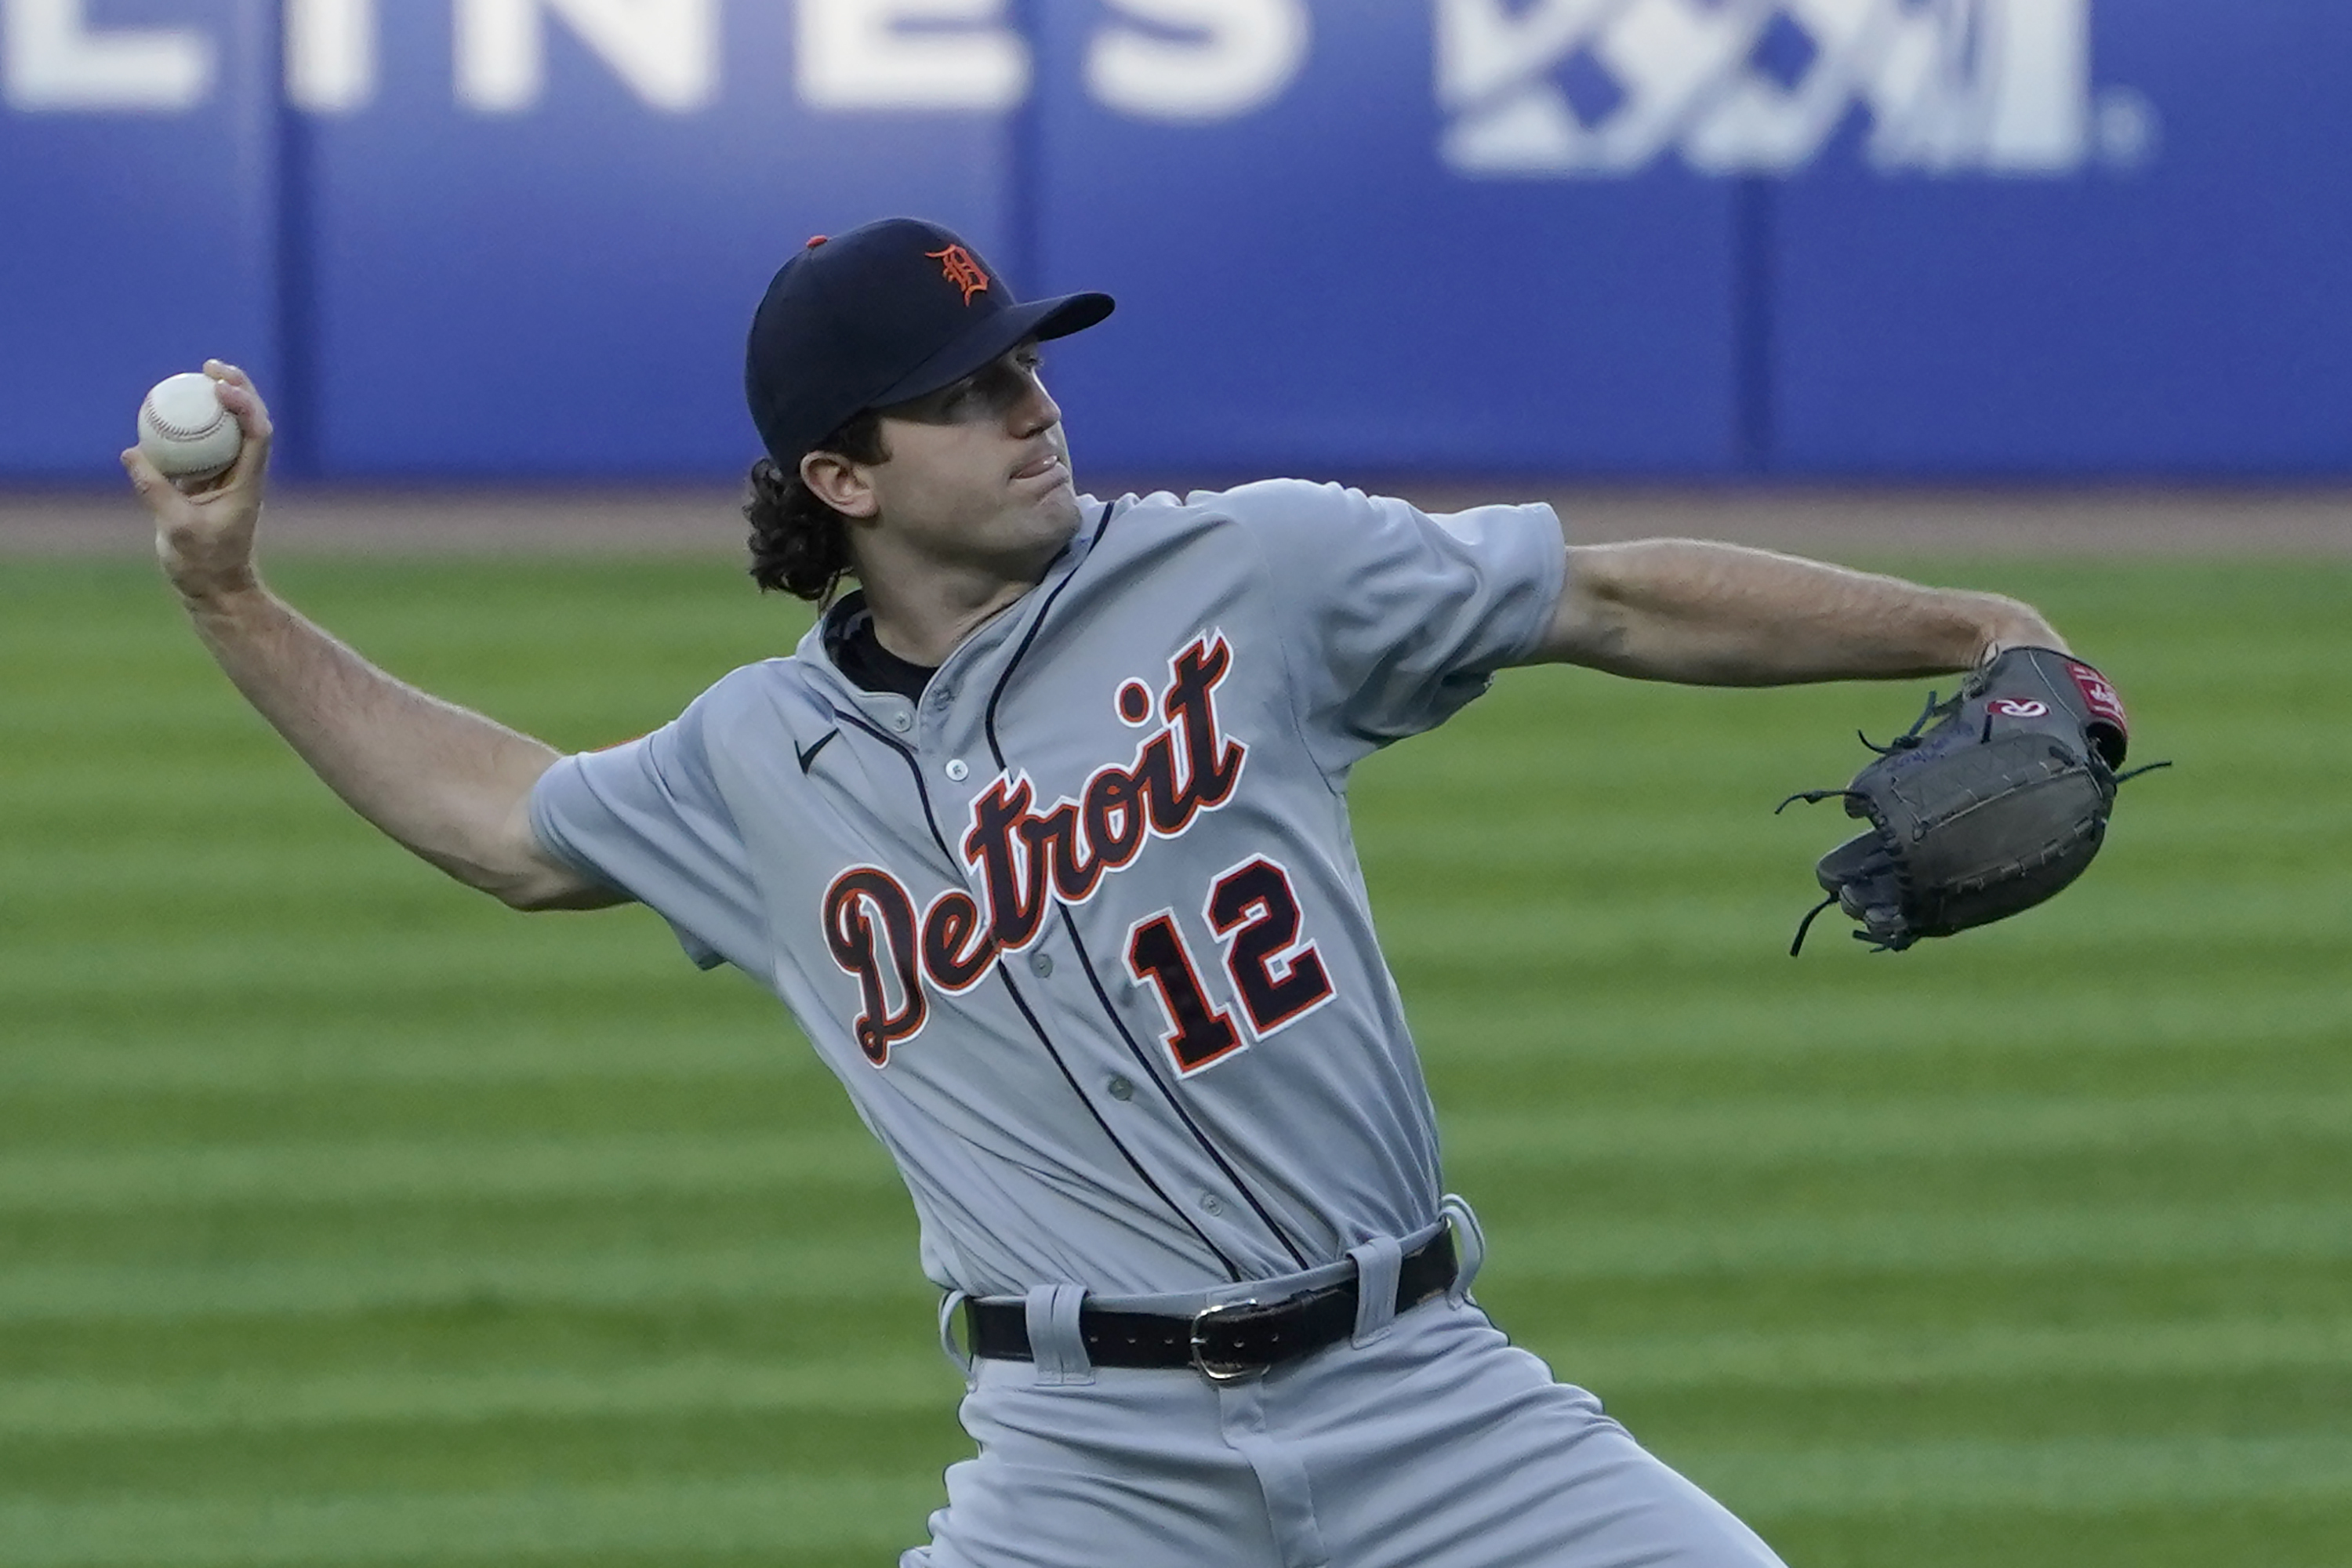 How to watch the Detroit Tigers vs